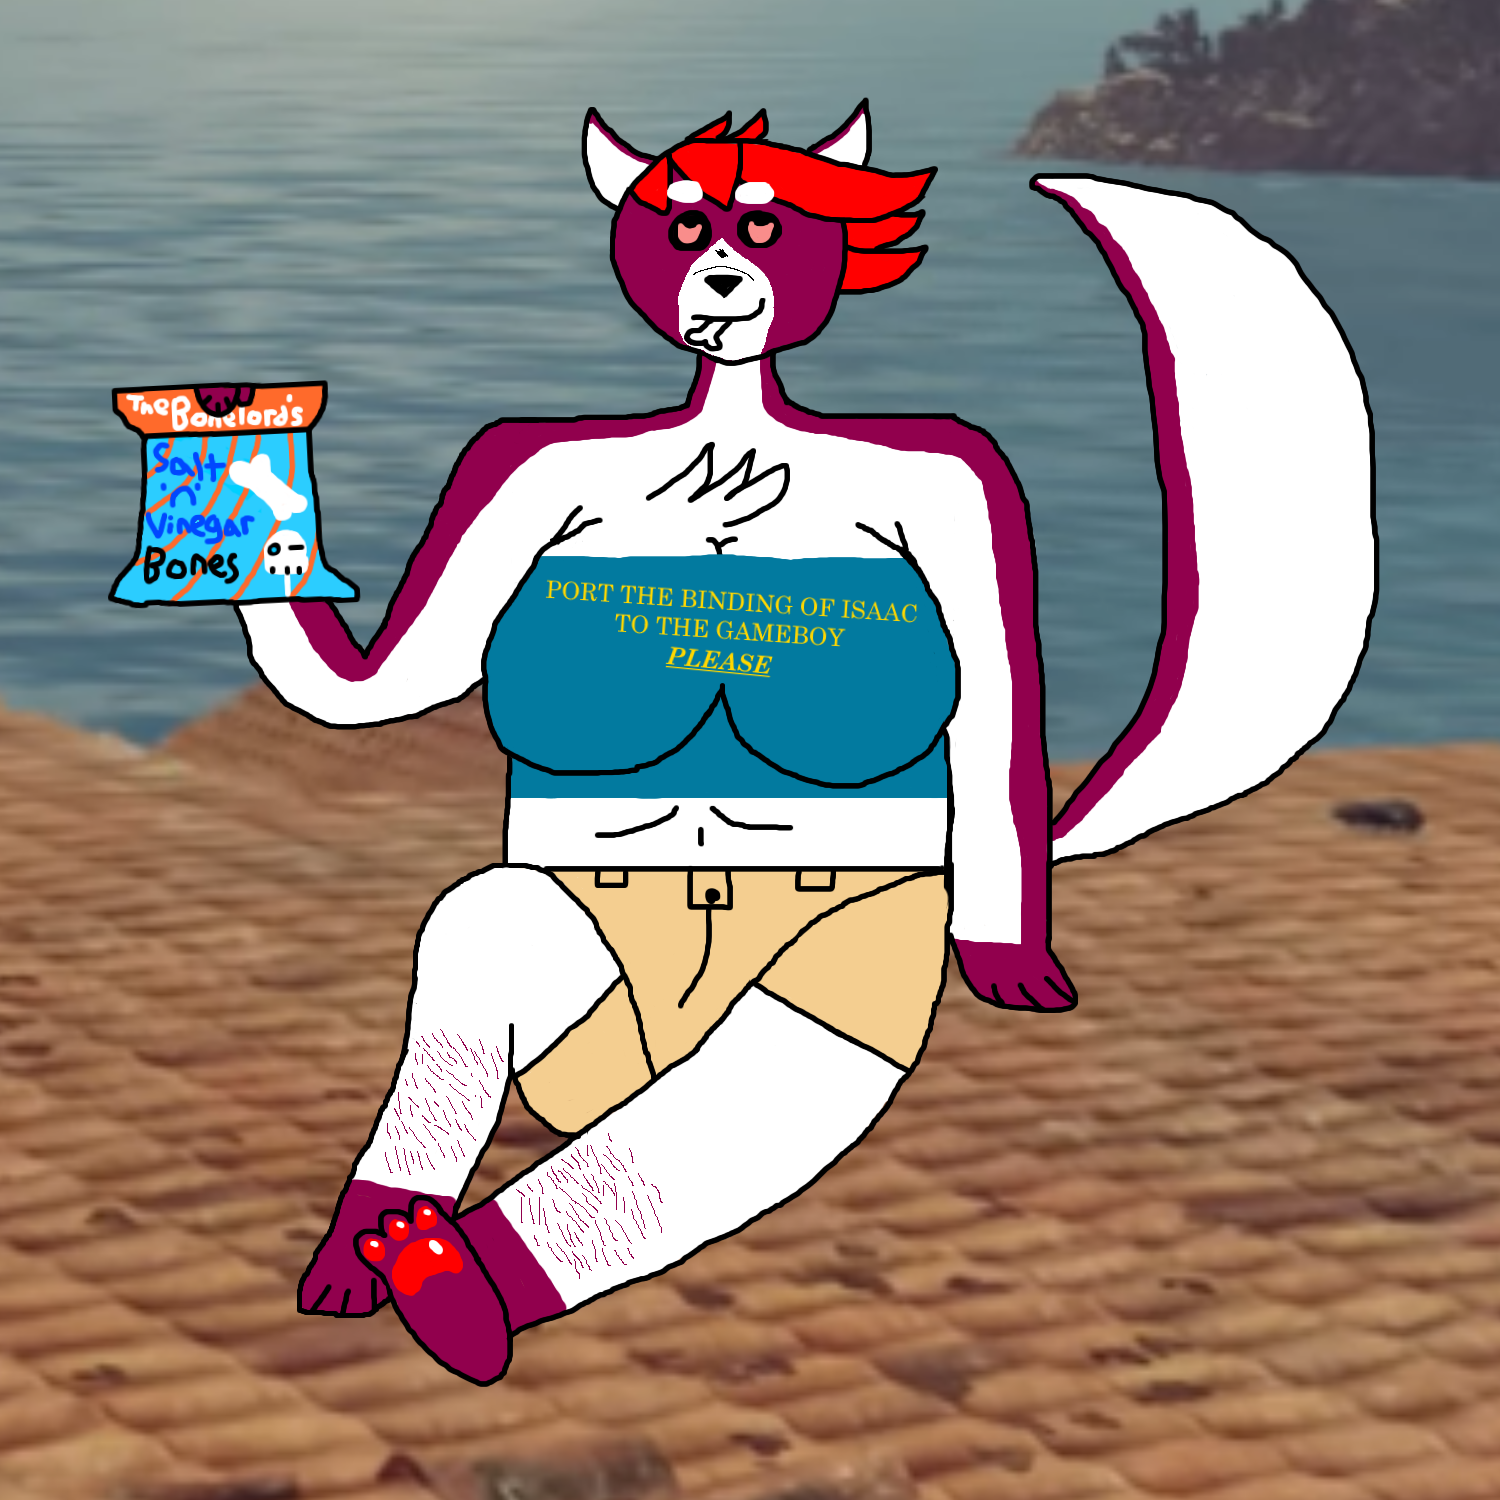 Alt text: A picture of my fursona, a very large red and white dog with short bright red hair holding a bag of bones, stylized like a potato chip bag, out to you. She has one in her mouth.